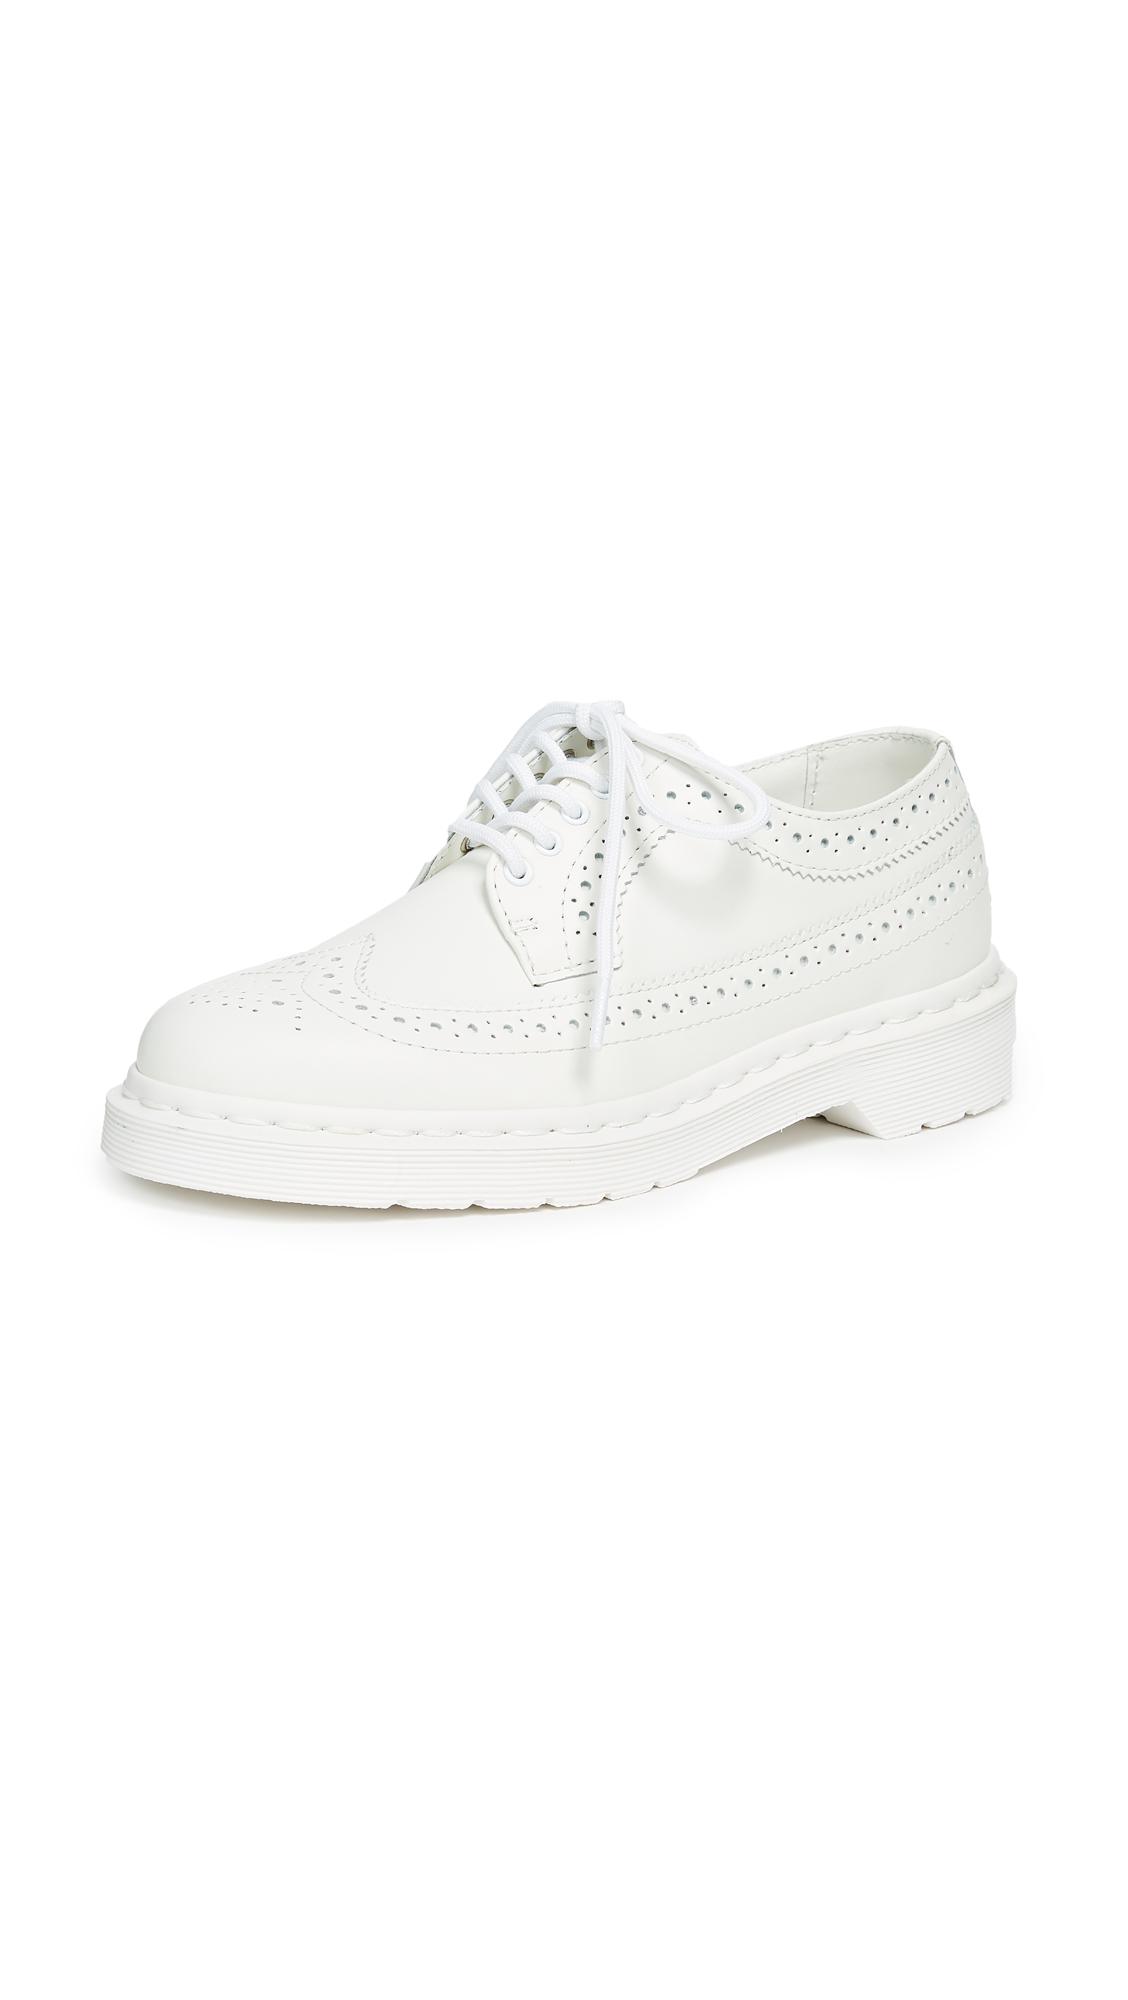 Dr. Martens Leather 3989 Mono Shoes in White | Lyst